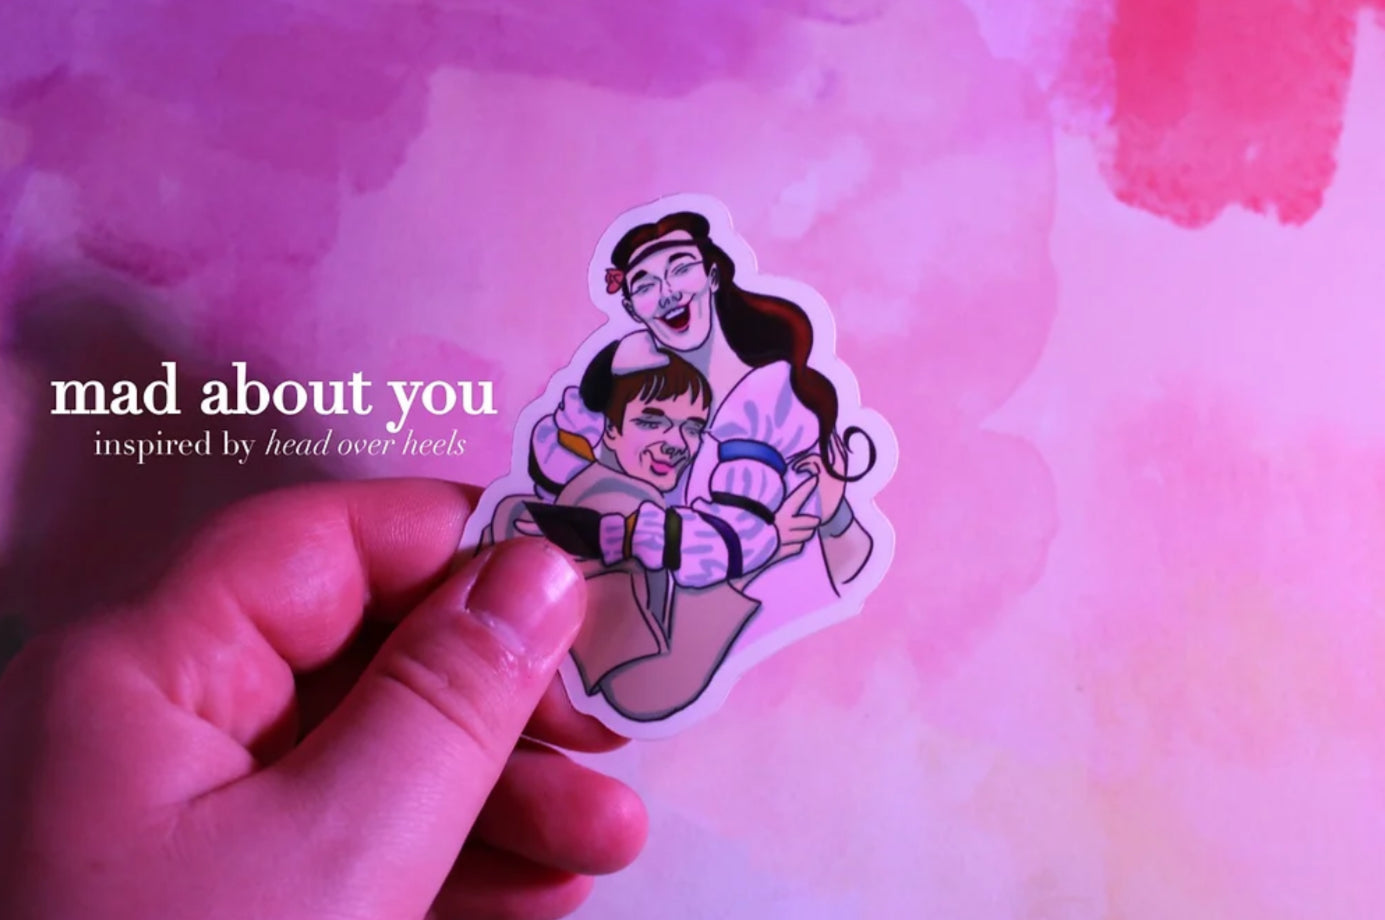 mad about you (sticker)